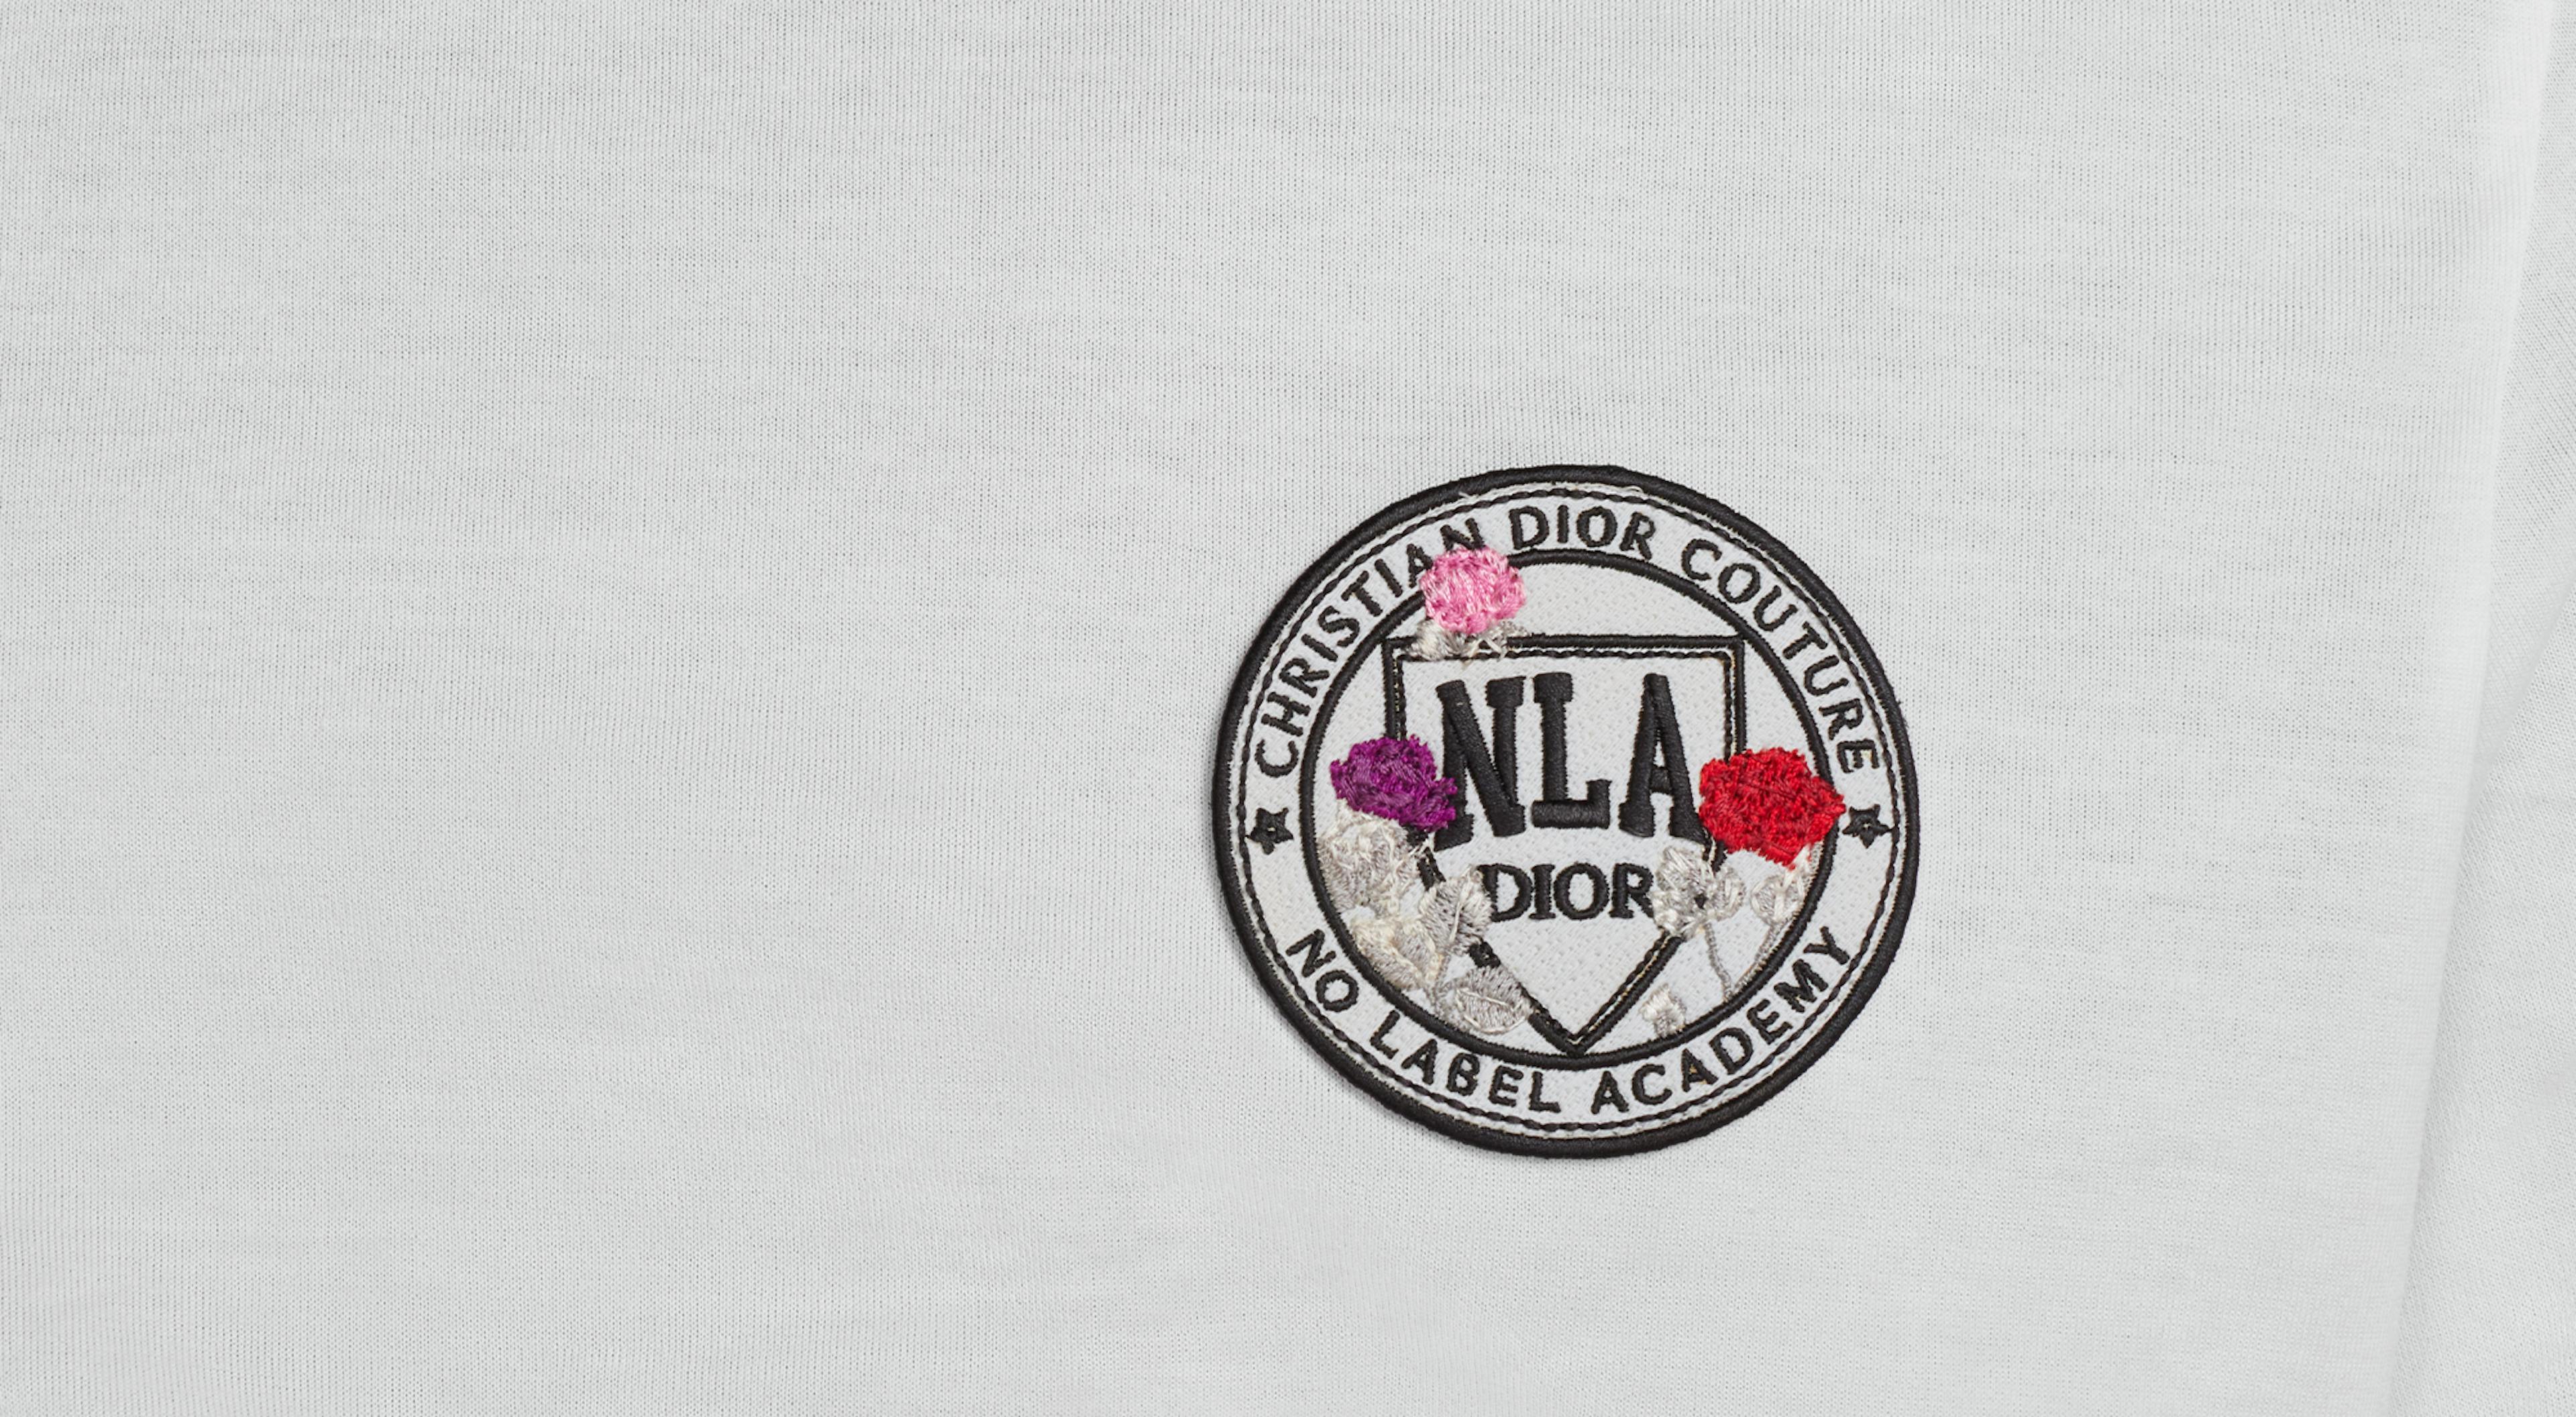 Cover Dior creates uniforms for No Label Academy in collaboration with rapper IDK